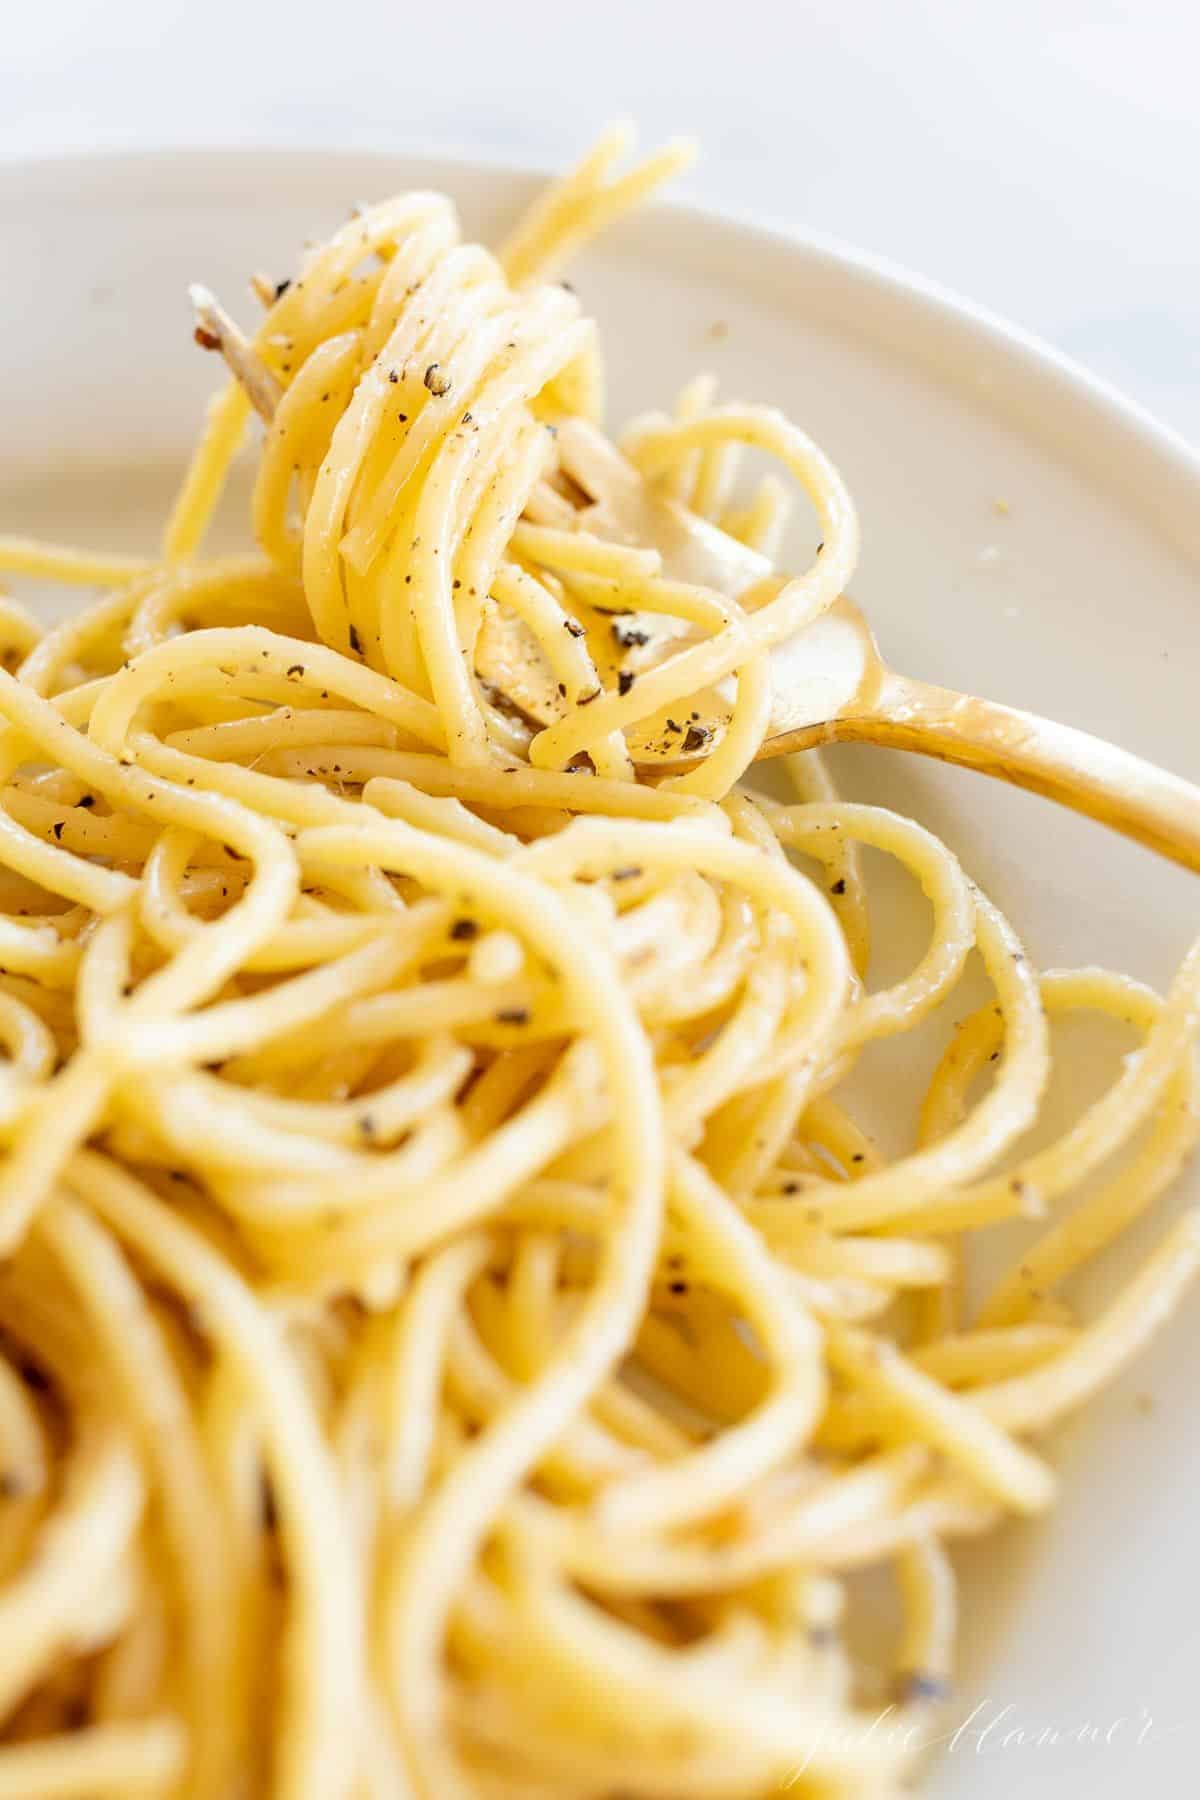 Image featuring a white plate full of cacio e pepe with spaghetti noodles, gold fork twirled with pasta on the side of plate.